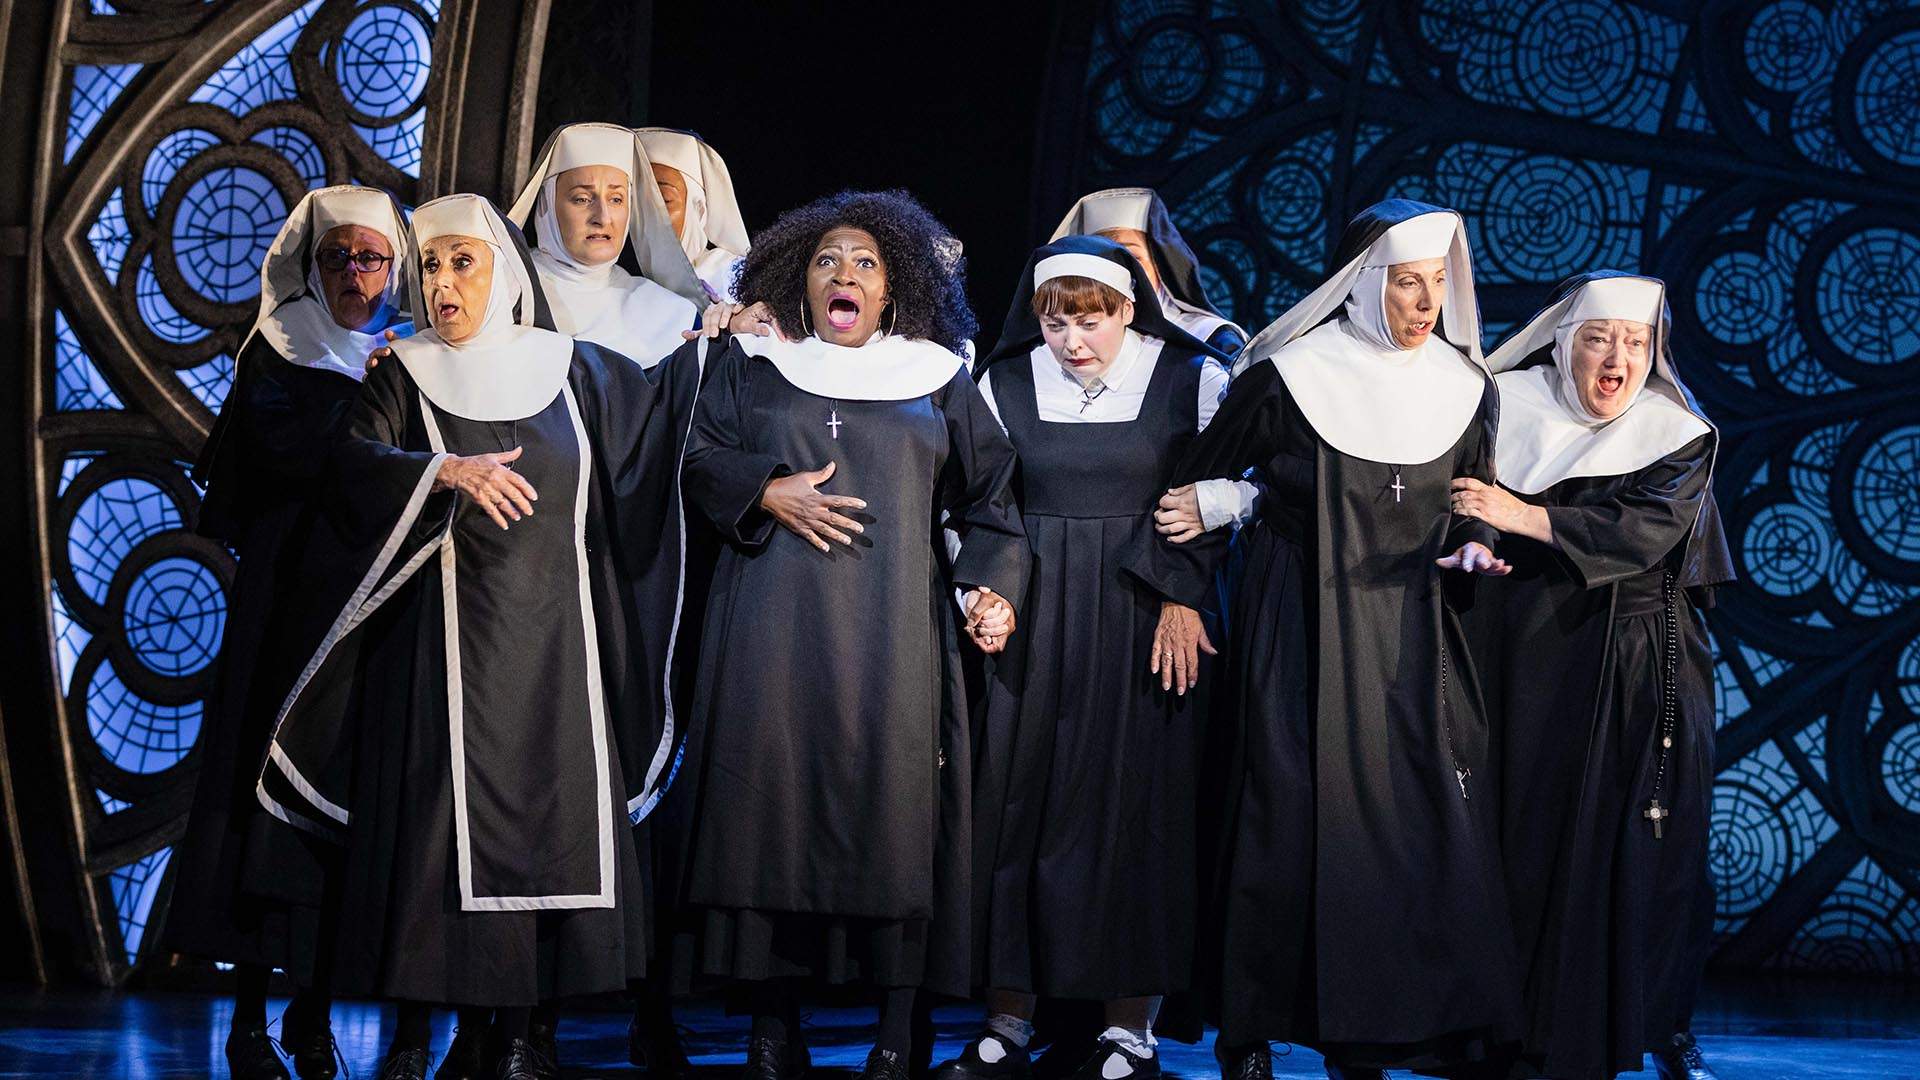 'Sister Act' Is the Next Smash-Hit Broadway Musical That's Set to Finally Make Its Australian Premiere